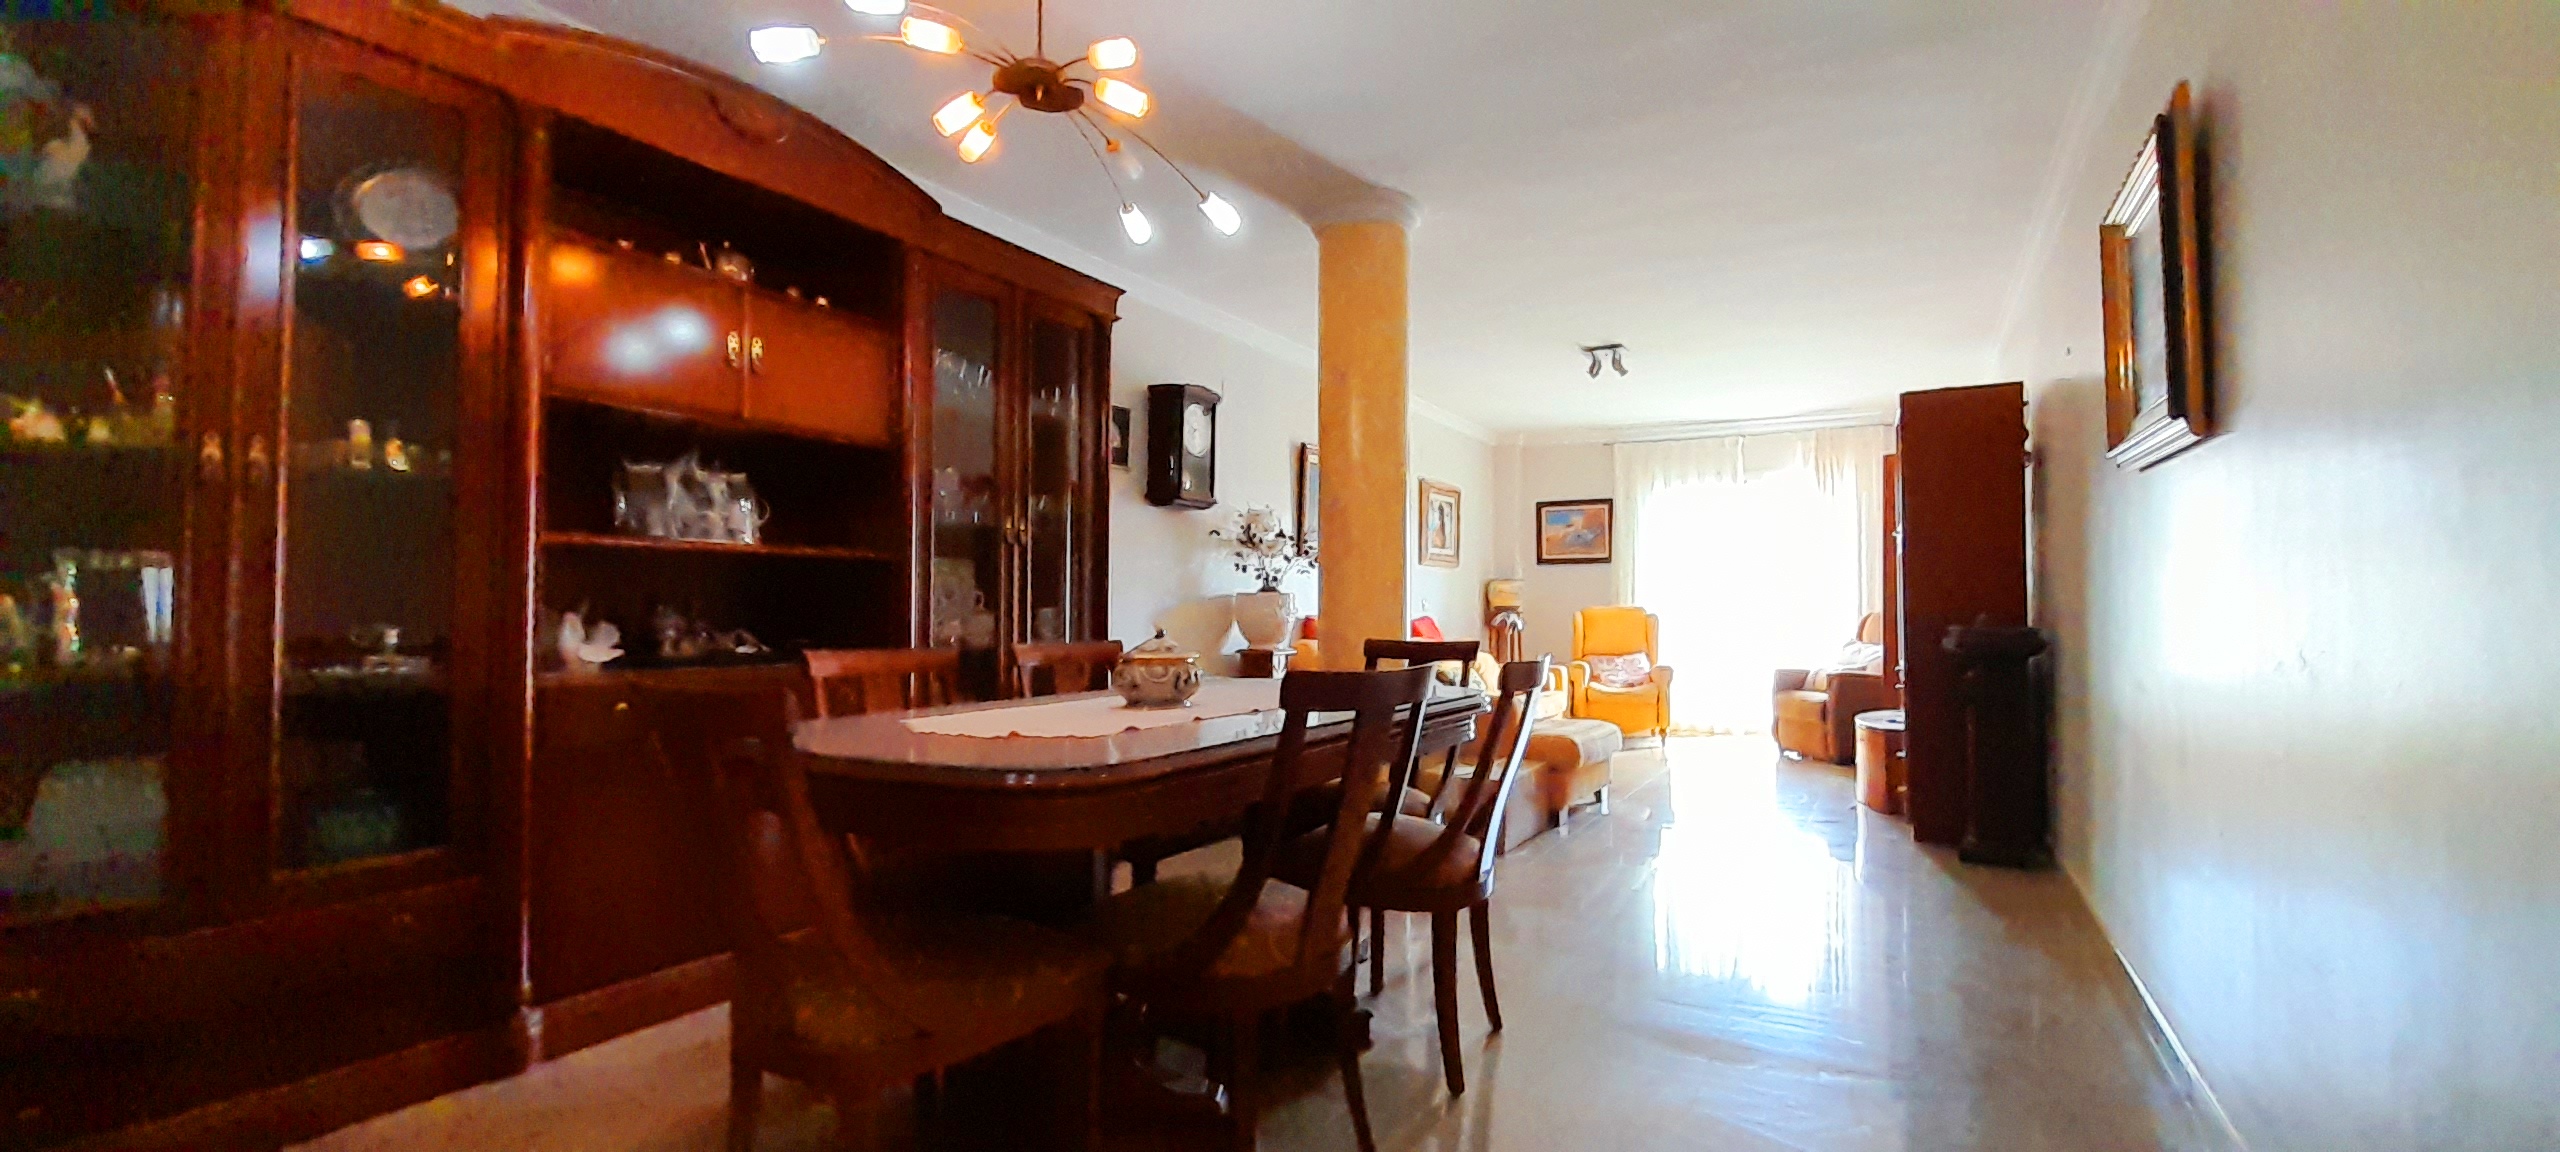 Large 3 Bedroom Apartment in the Old Town